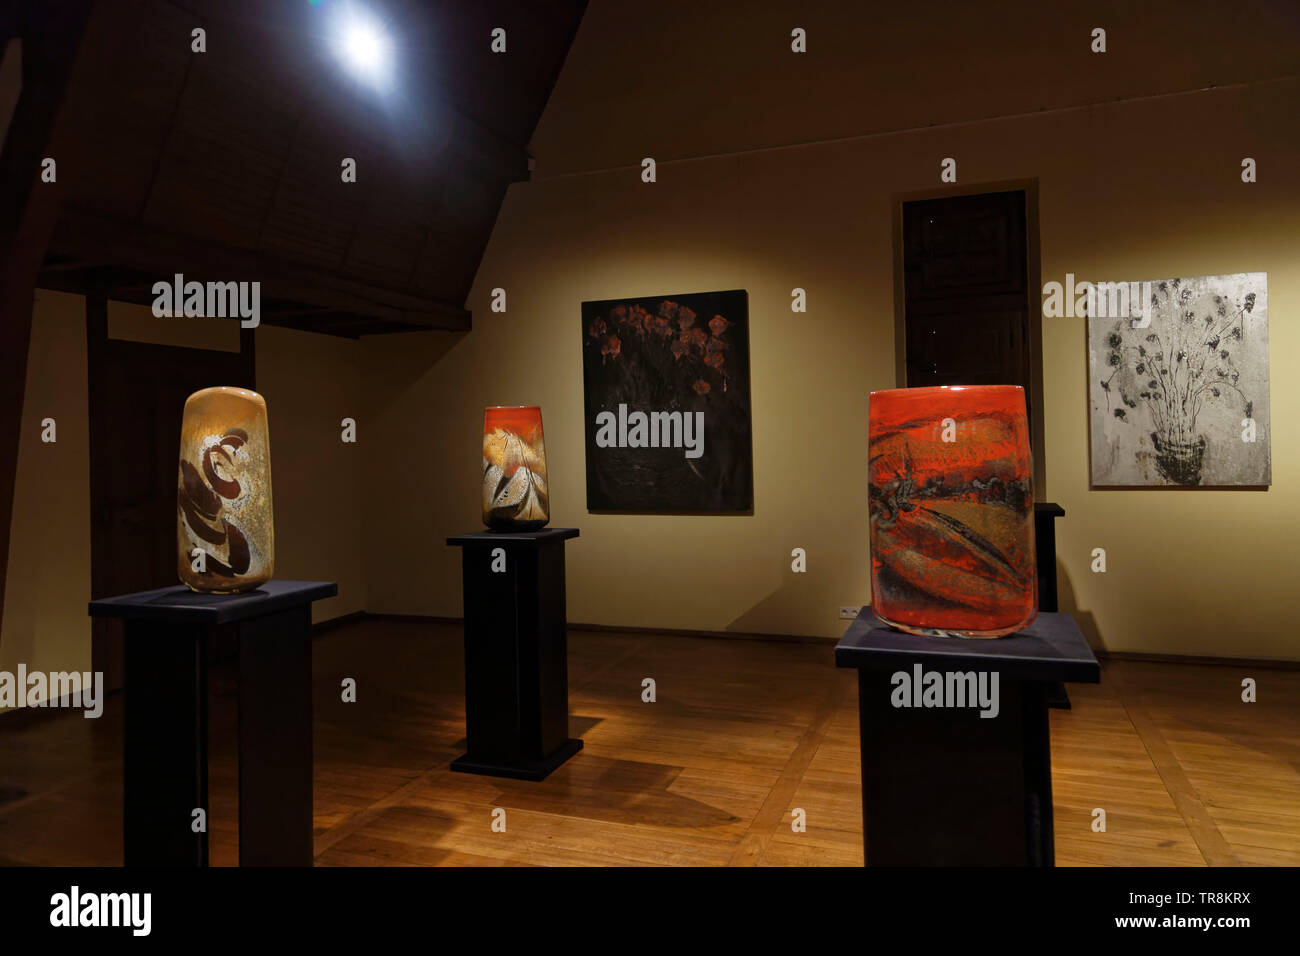 Tours, France.24th May,2019.Vases of Marisa & Alain Begou at Exhibition Re-naissance(s) of the Capazza Gallery.©:Veronique Phitoussi/Alamy Stock Photo Stock Photo